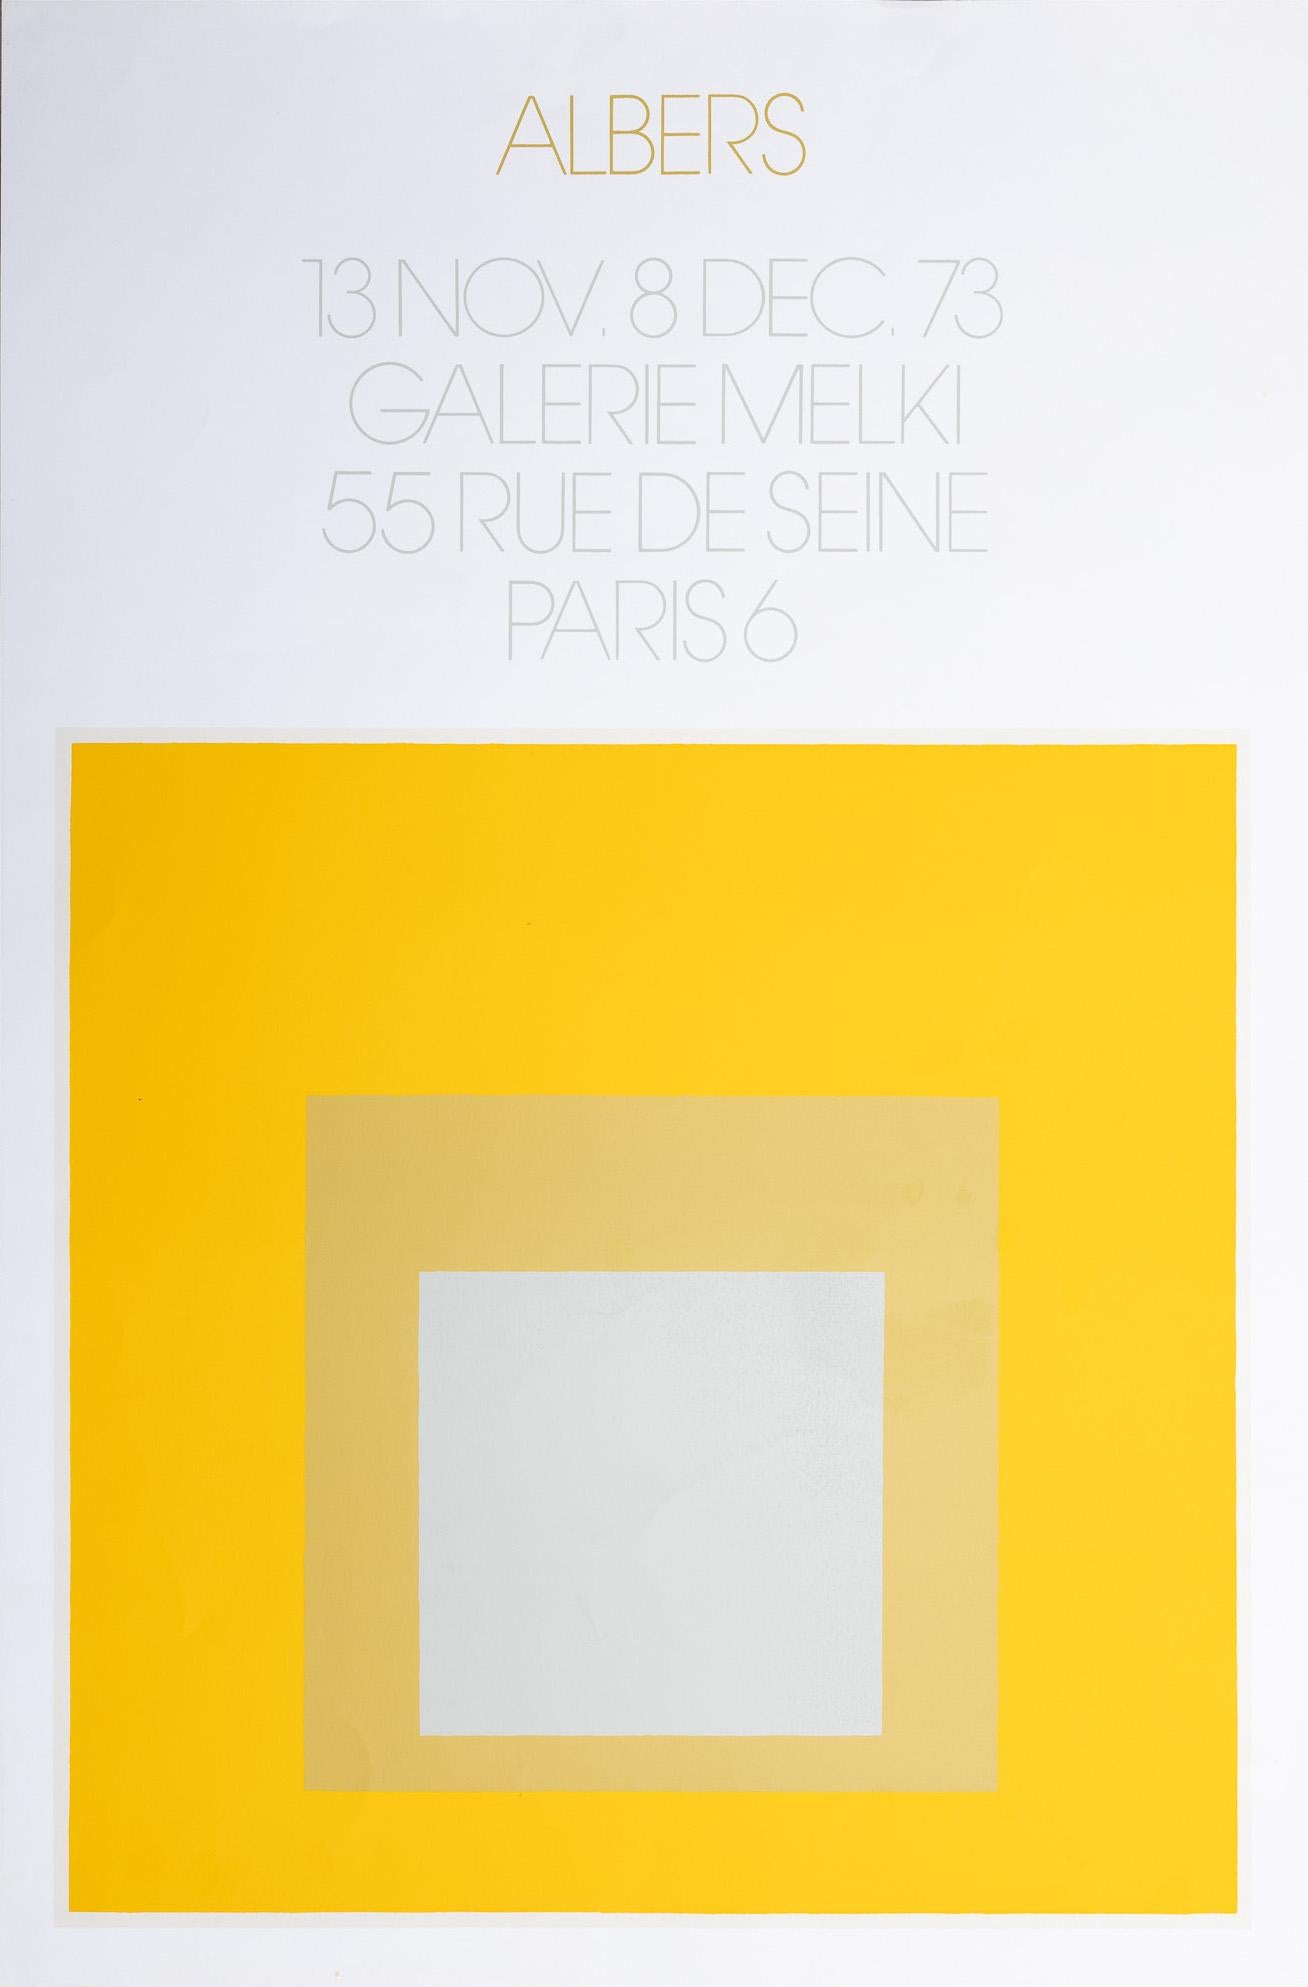 A screen print on paper poster by minimalist, op artist Joseph Albers advertising an exhibit at Galerie Melki, Paris, in 1973.  The piece features a nested series of square color fields in yellow hues.

The text reads:
ALBERS
13 NOV. 8 DEC.